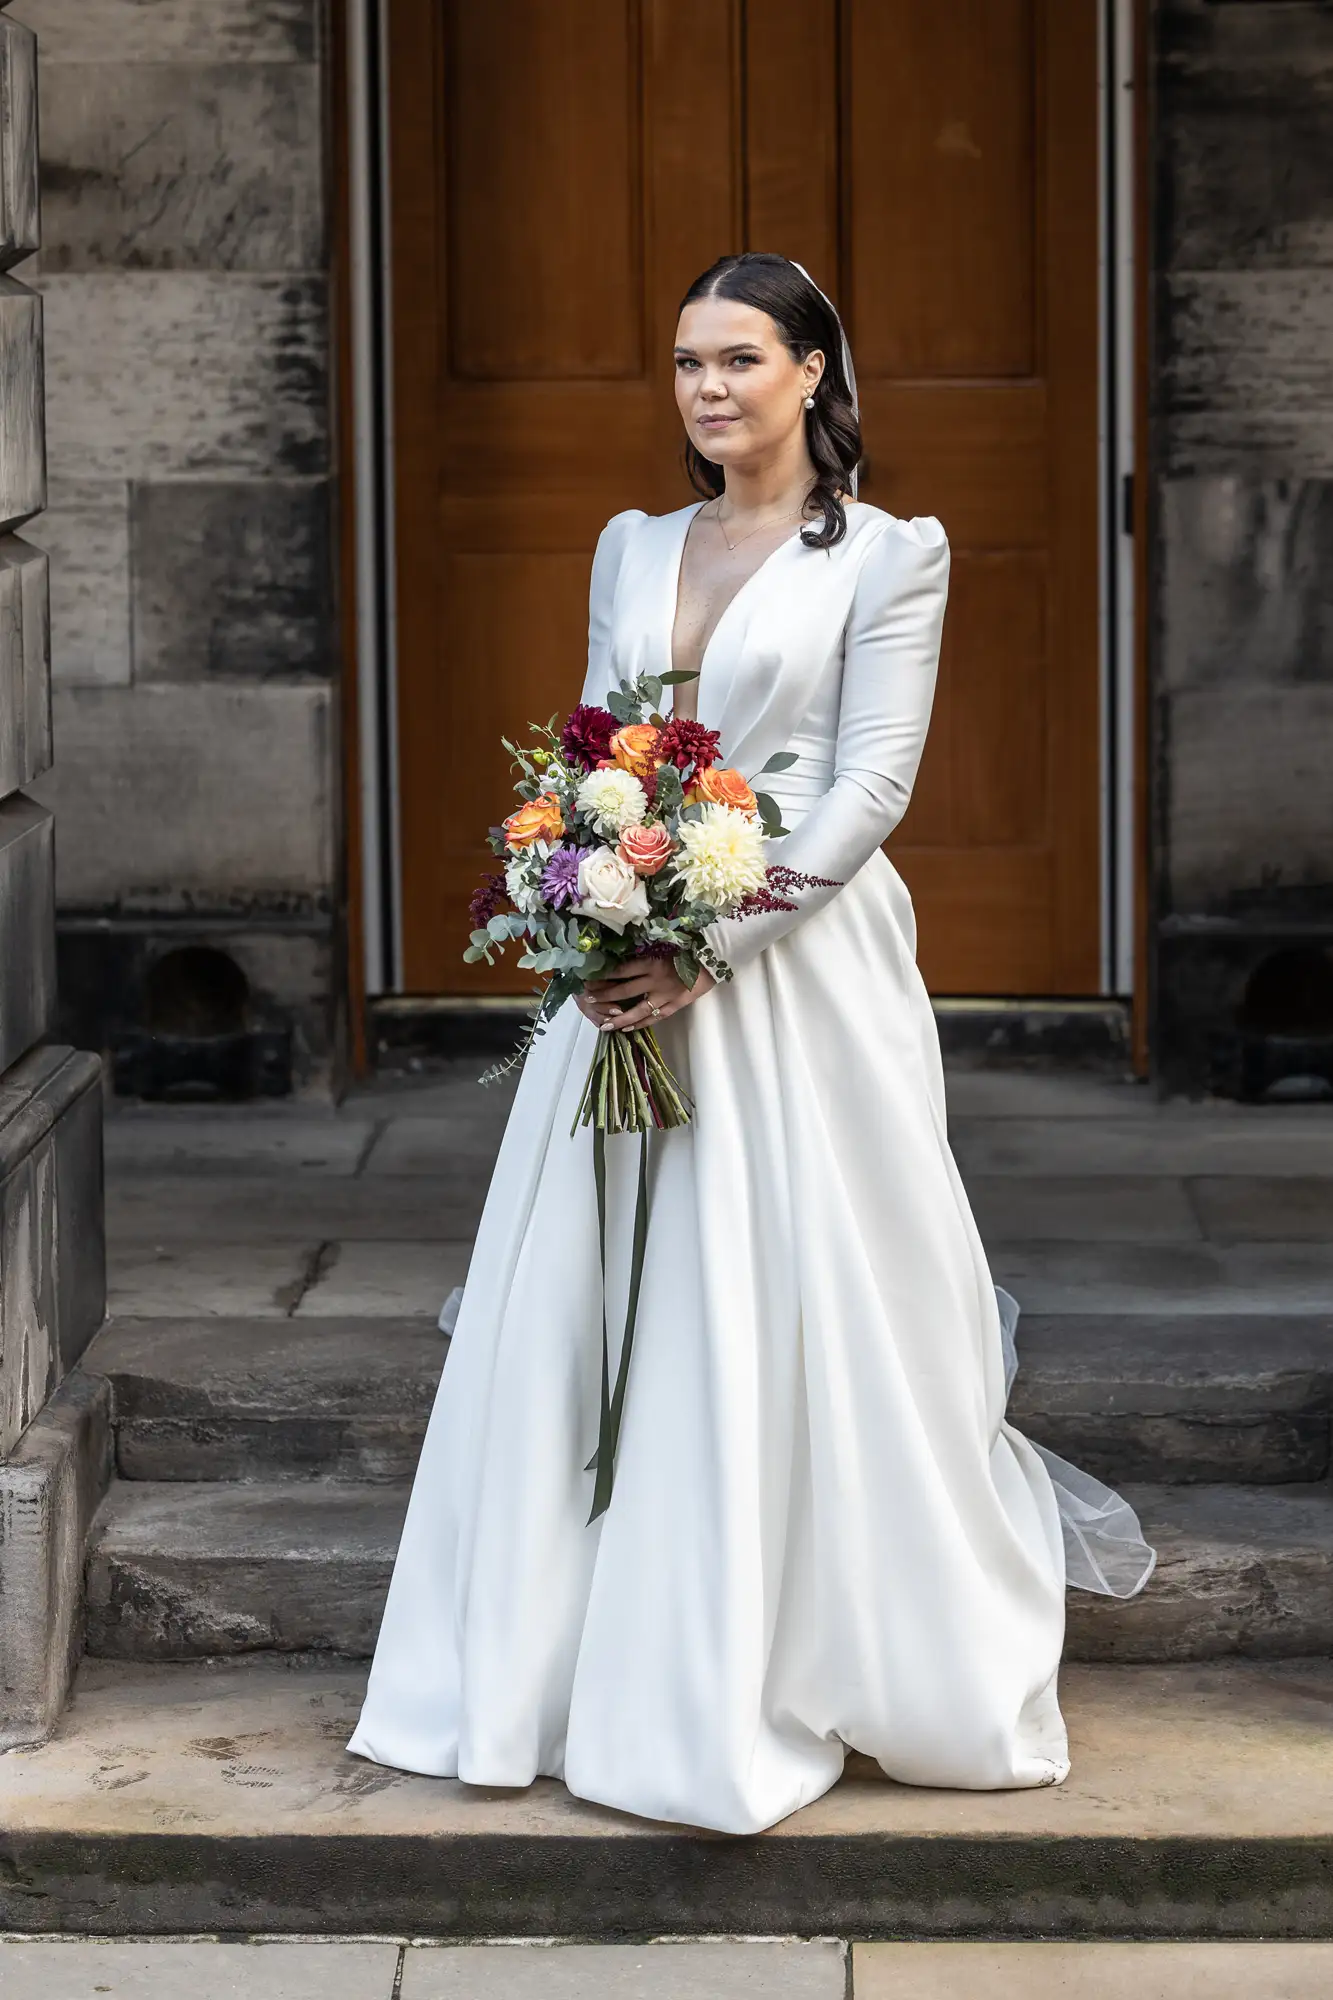 A bride in a white long-sleeve gown holds a colorful bouquet, standing in front of a dark wooden door.